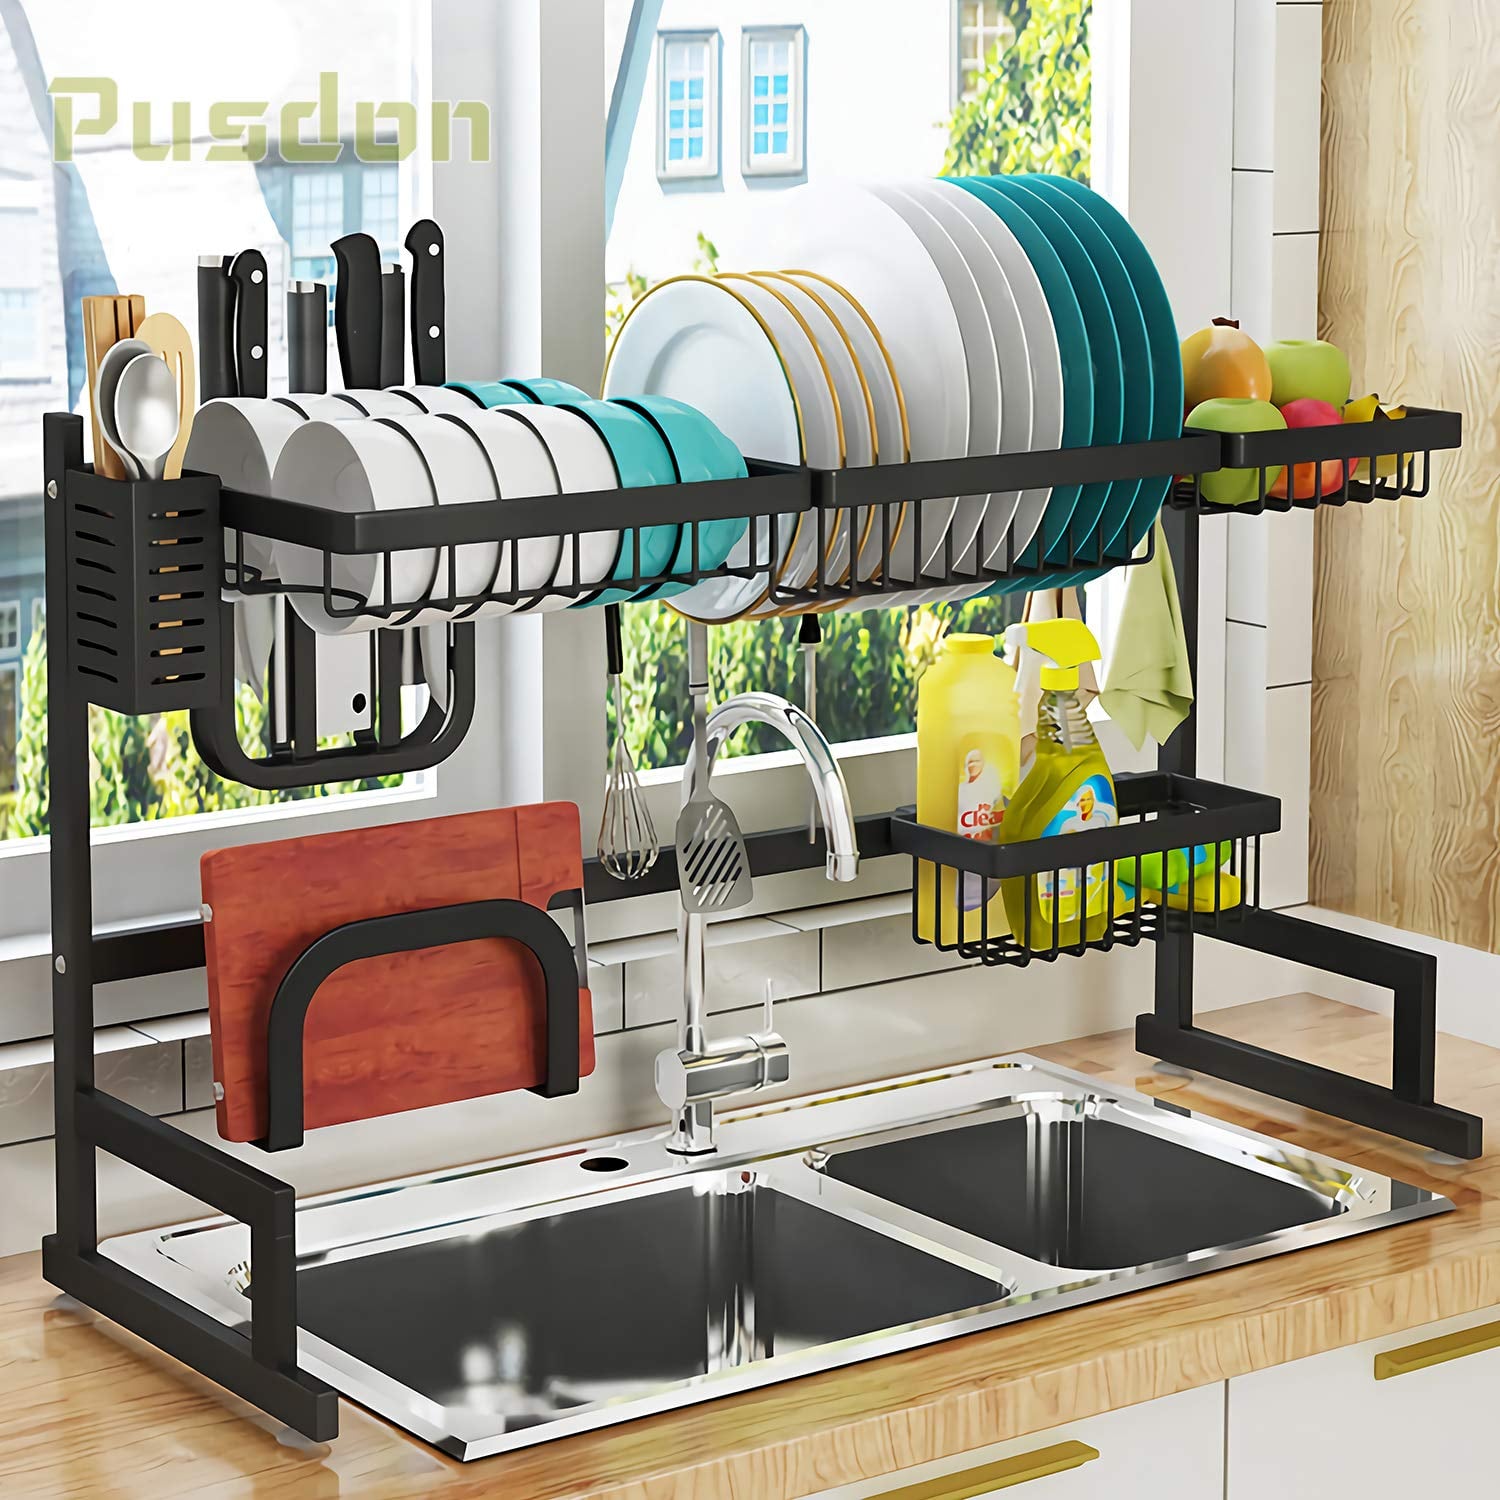 50 Small Kitchen Storage Ideas You'll Wish You Knew Sooner